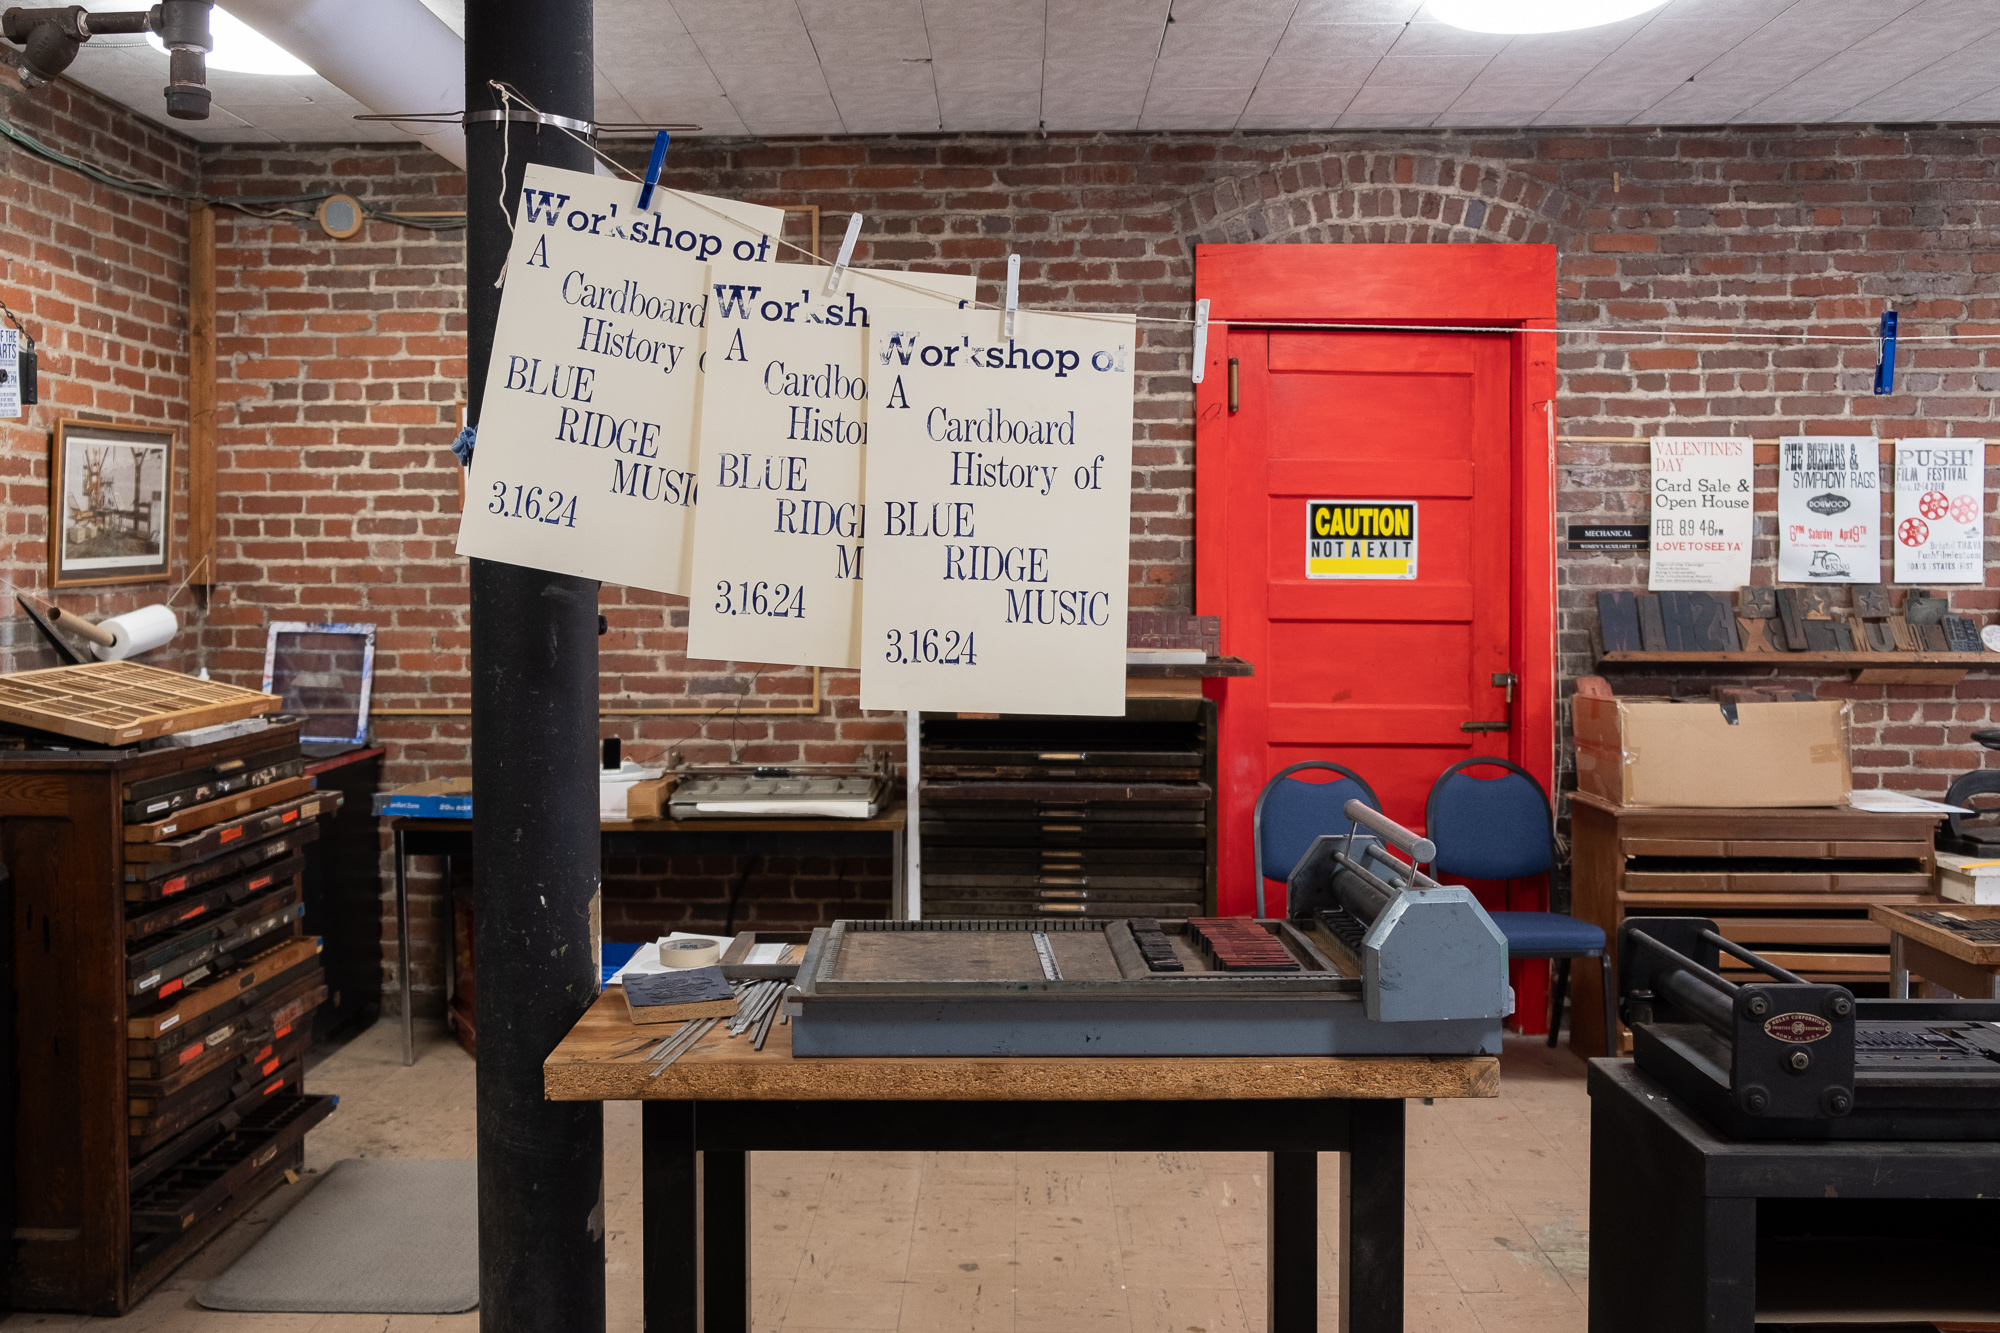 Letterpress and The Cardboard History of Blue Ridge Music